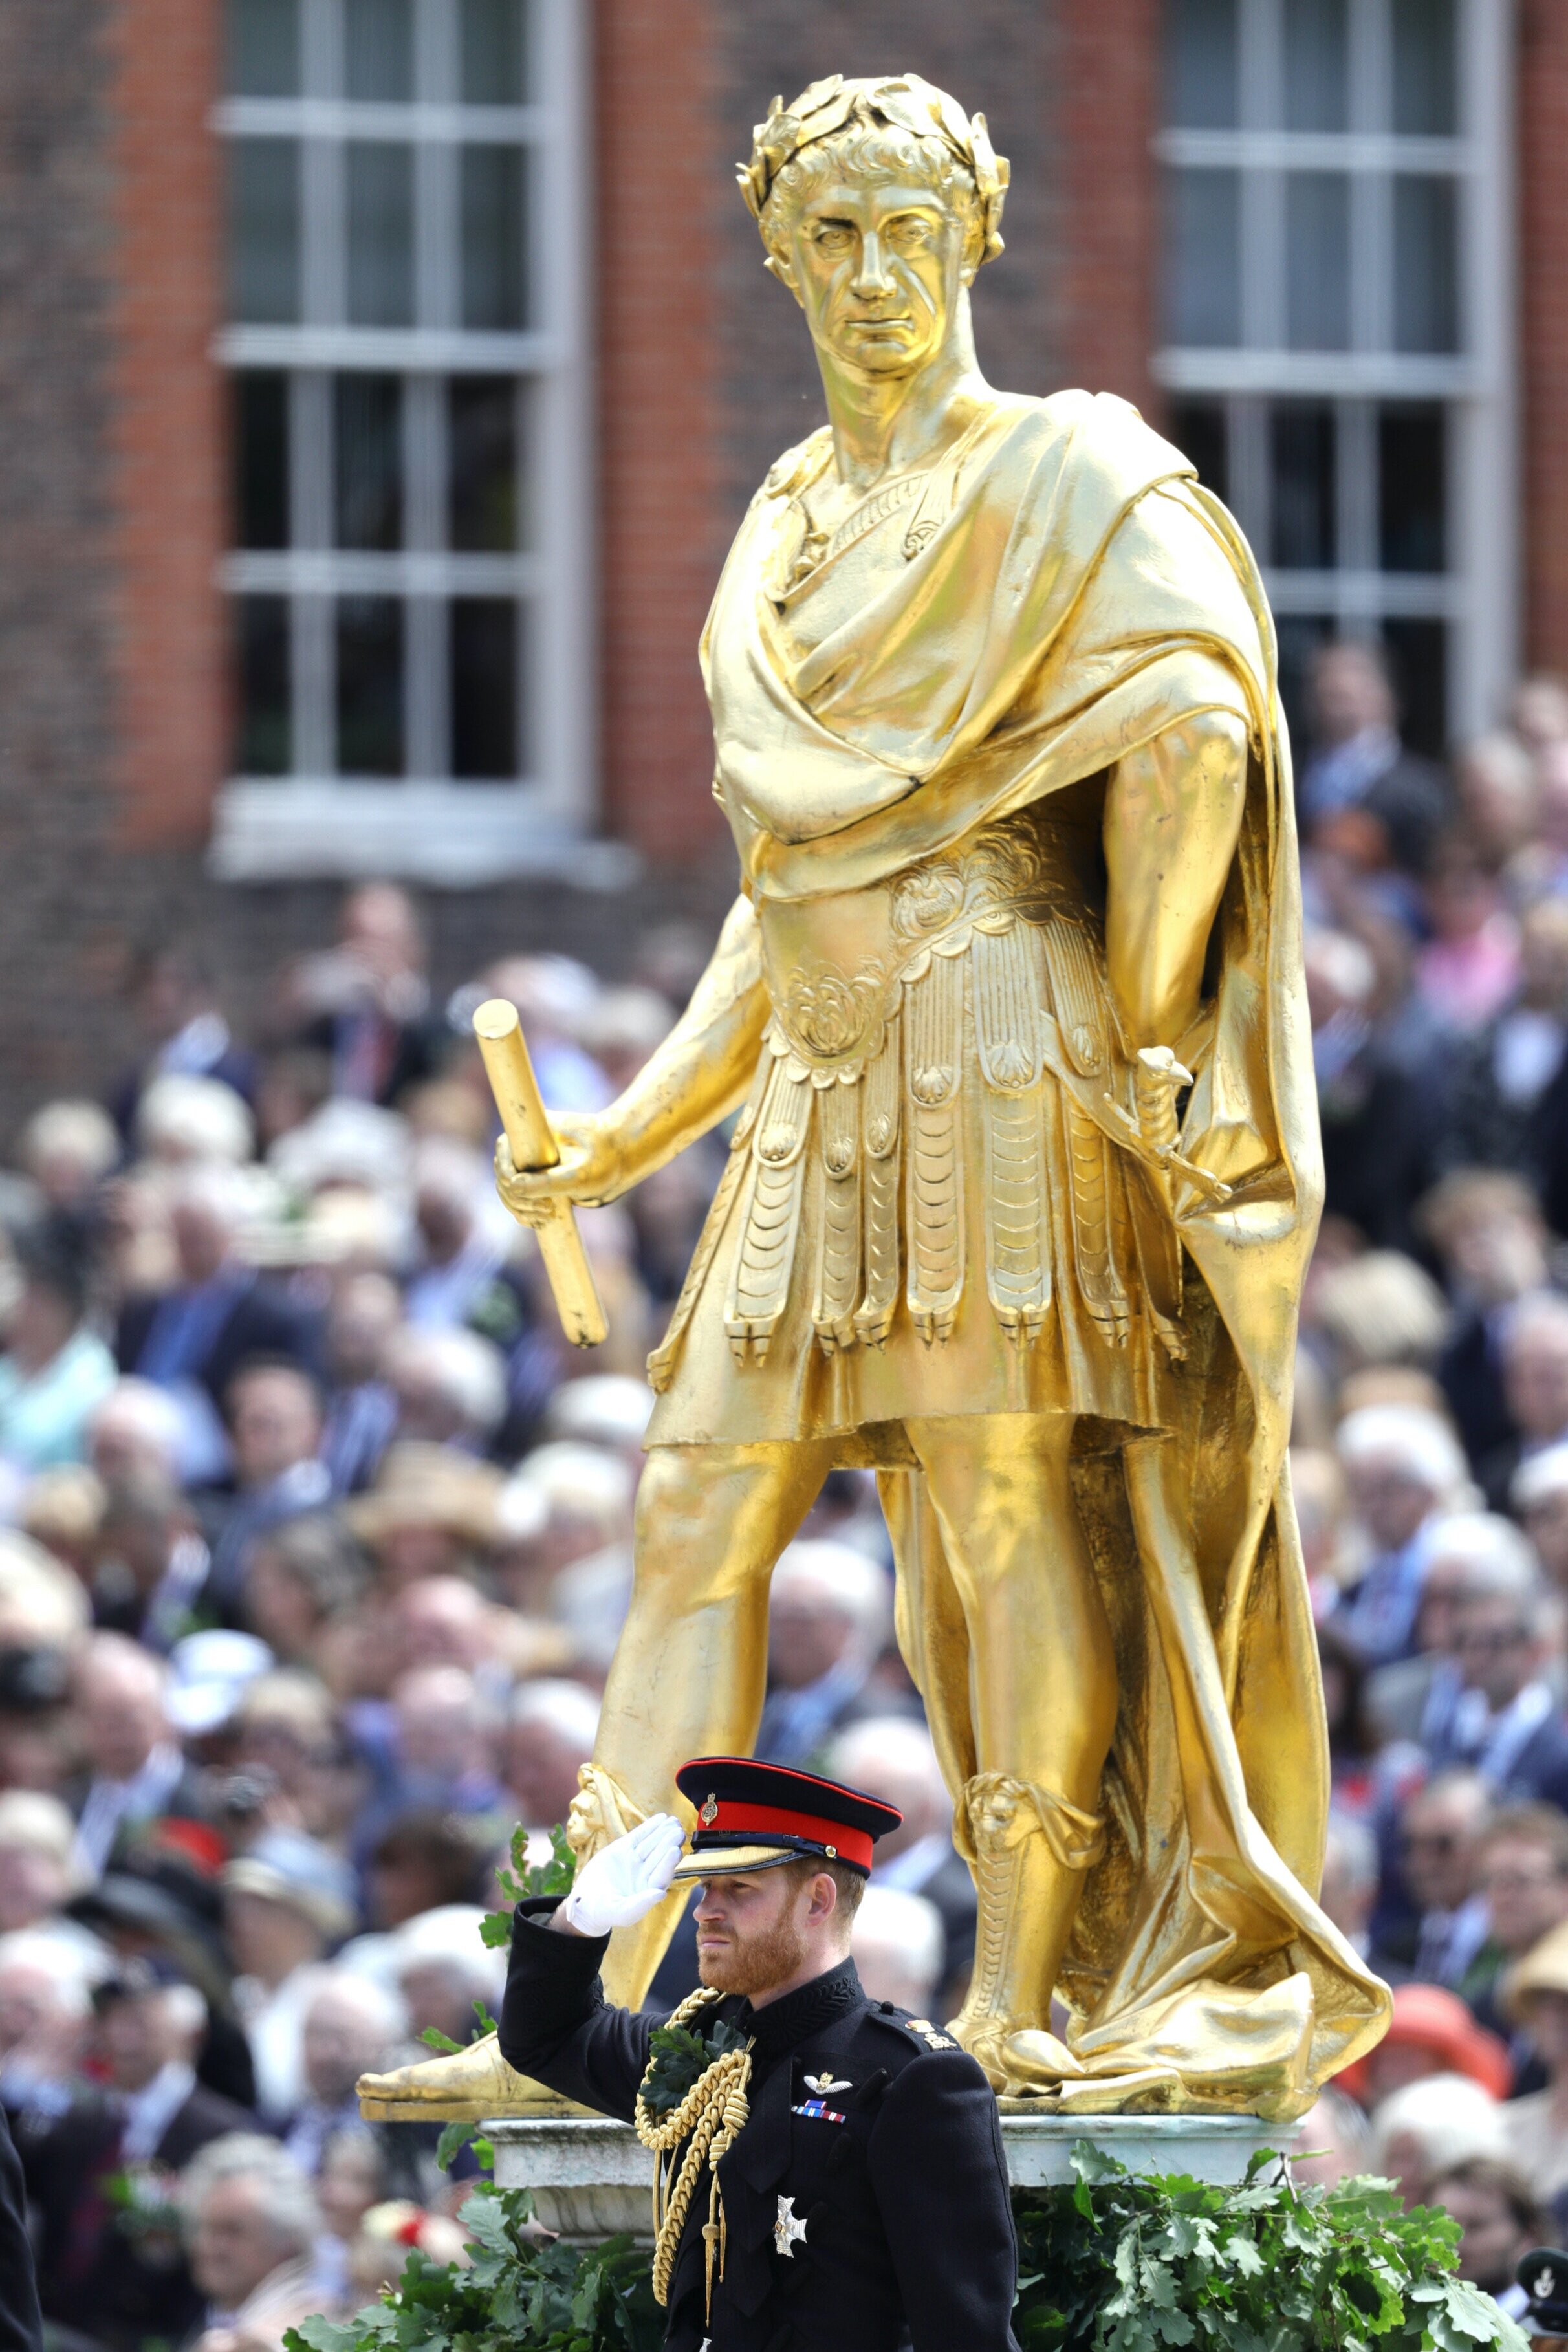  The Duke of Sussex during Founder's Day celebrations at the Royal Hospital Chelsea in west London. Picture by: Aaron Chown/PA Images. Date taken: 06-Jun-2019 